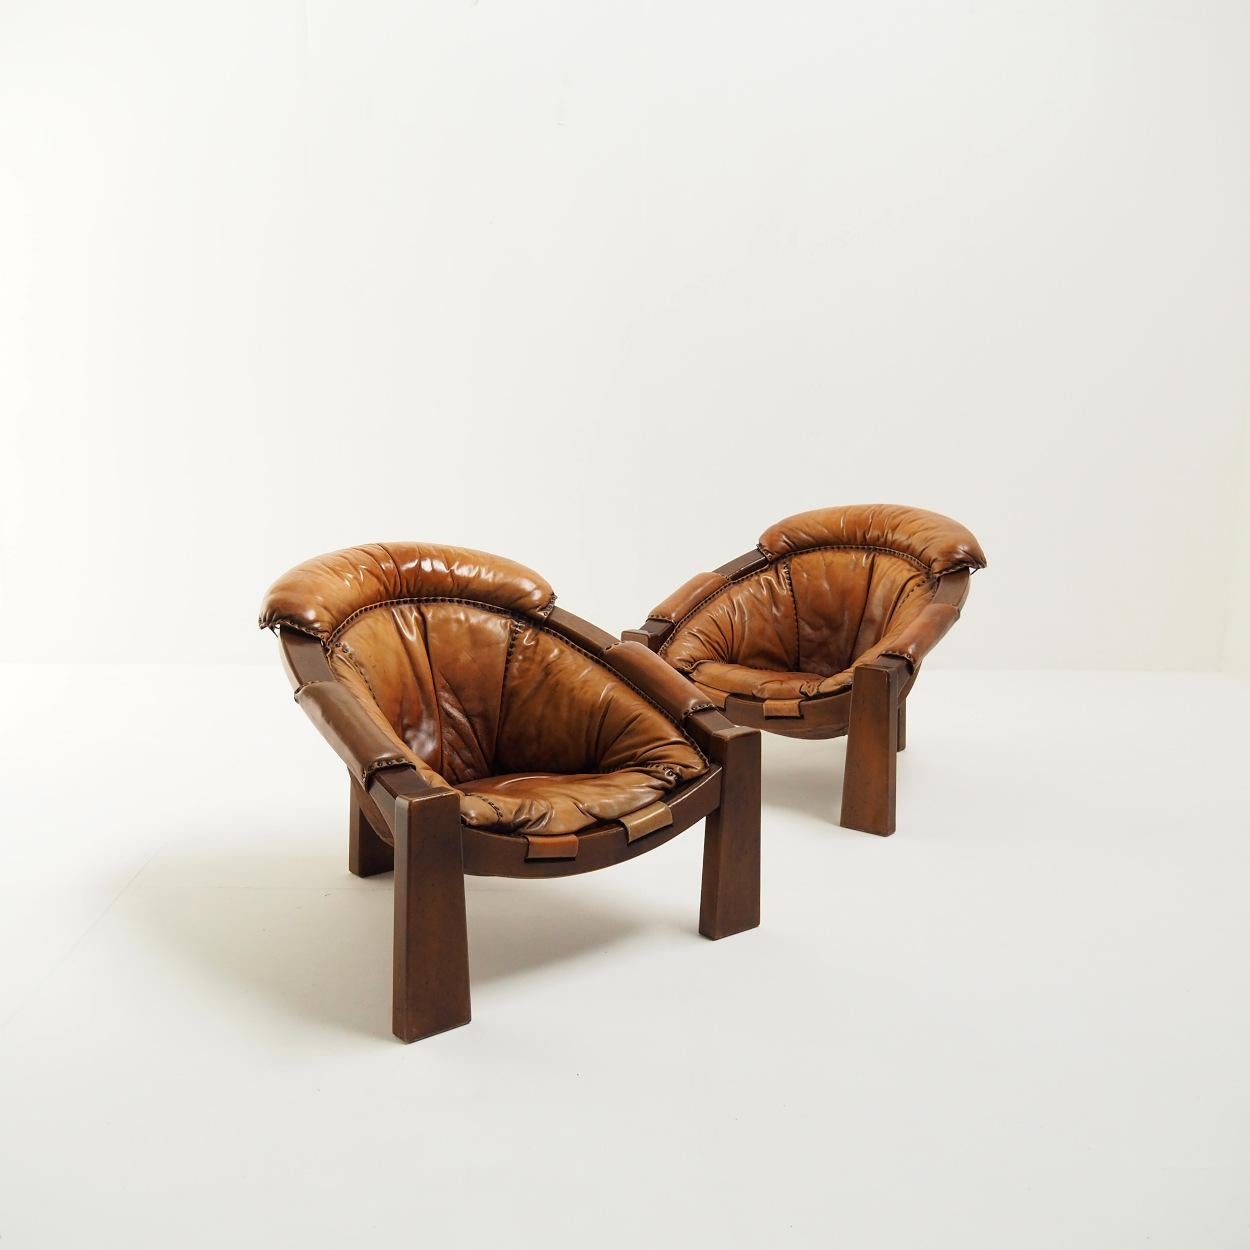 Italian Set of Chairs with Beautiful Patinated Leather. Italy, 1970s